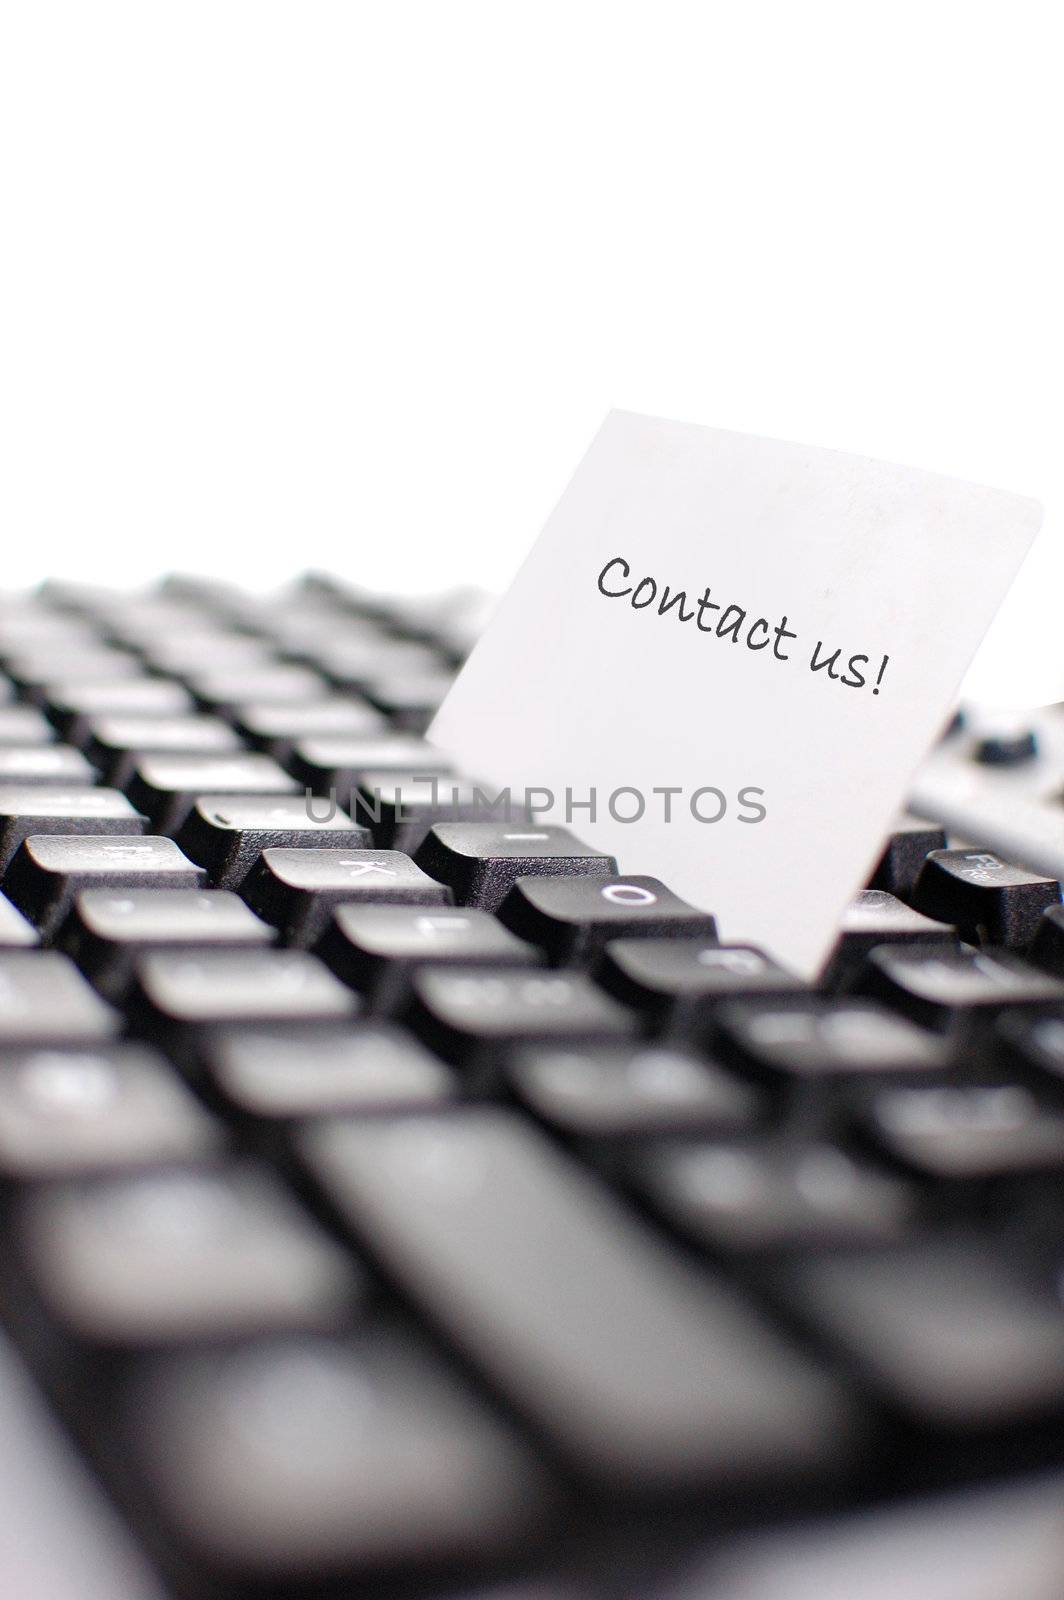 Business card on top of a computer keyboard (shallow depth of field)